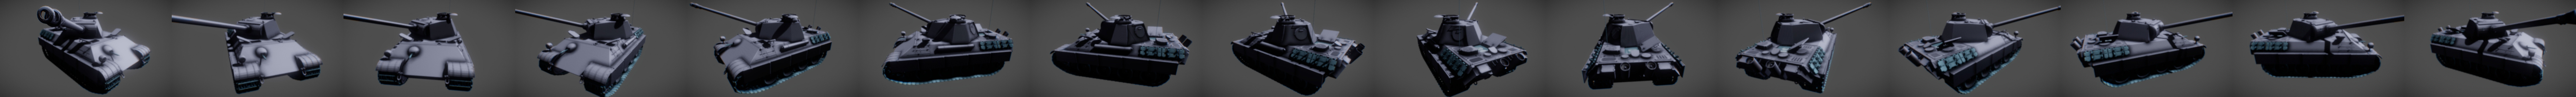 Panther G Final Download Free 3d Model By Stormer332 Stormer332 5d16d81 Sketchfab - tank ship turret roblox